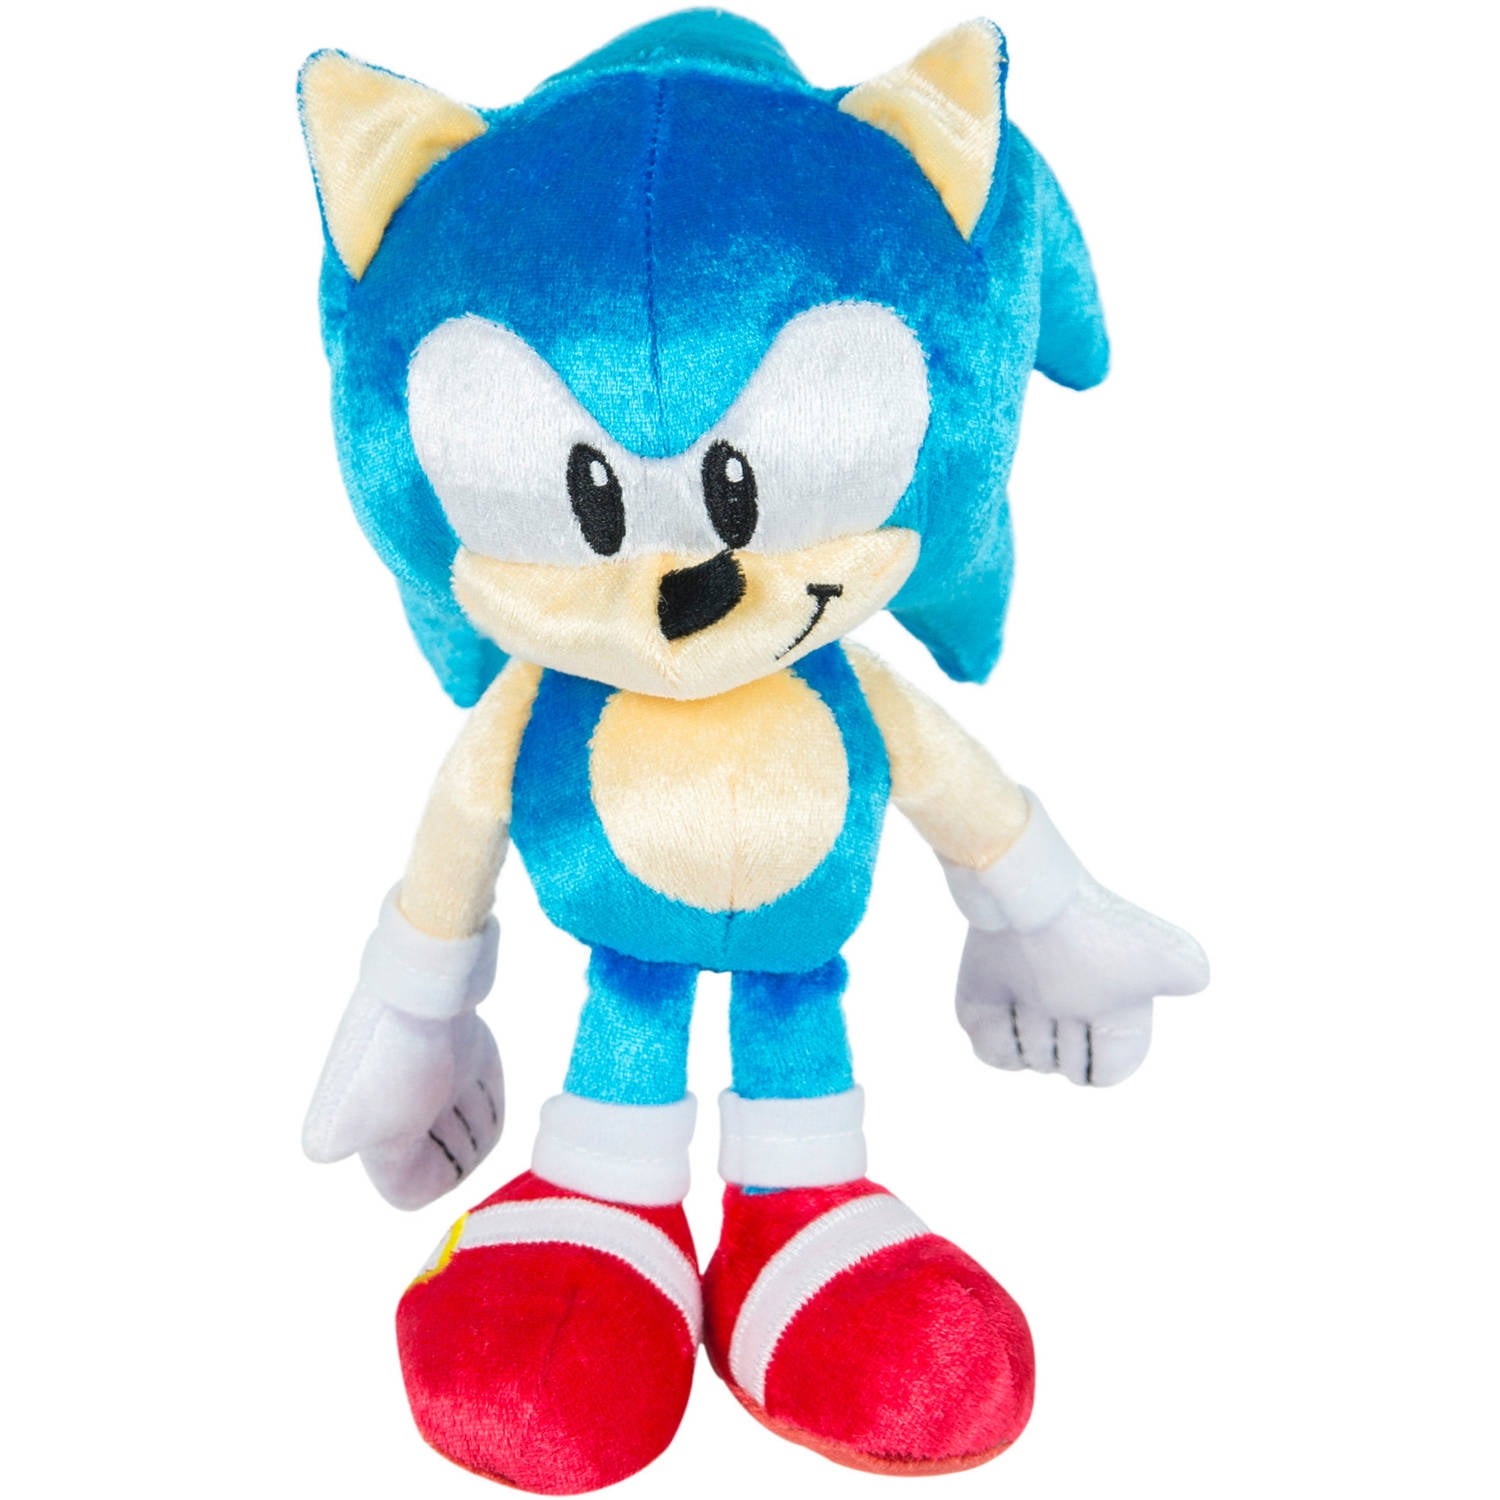 Sonic the Hedgehog, Collector Series Classic 1991 Ultimate Sonic